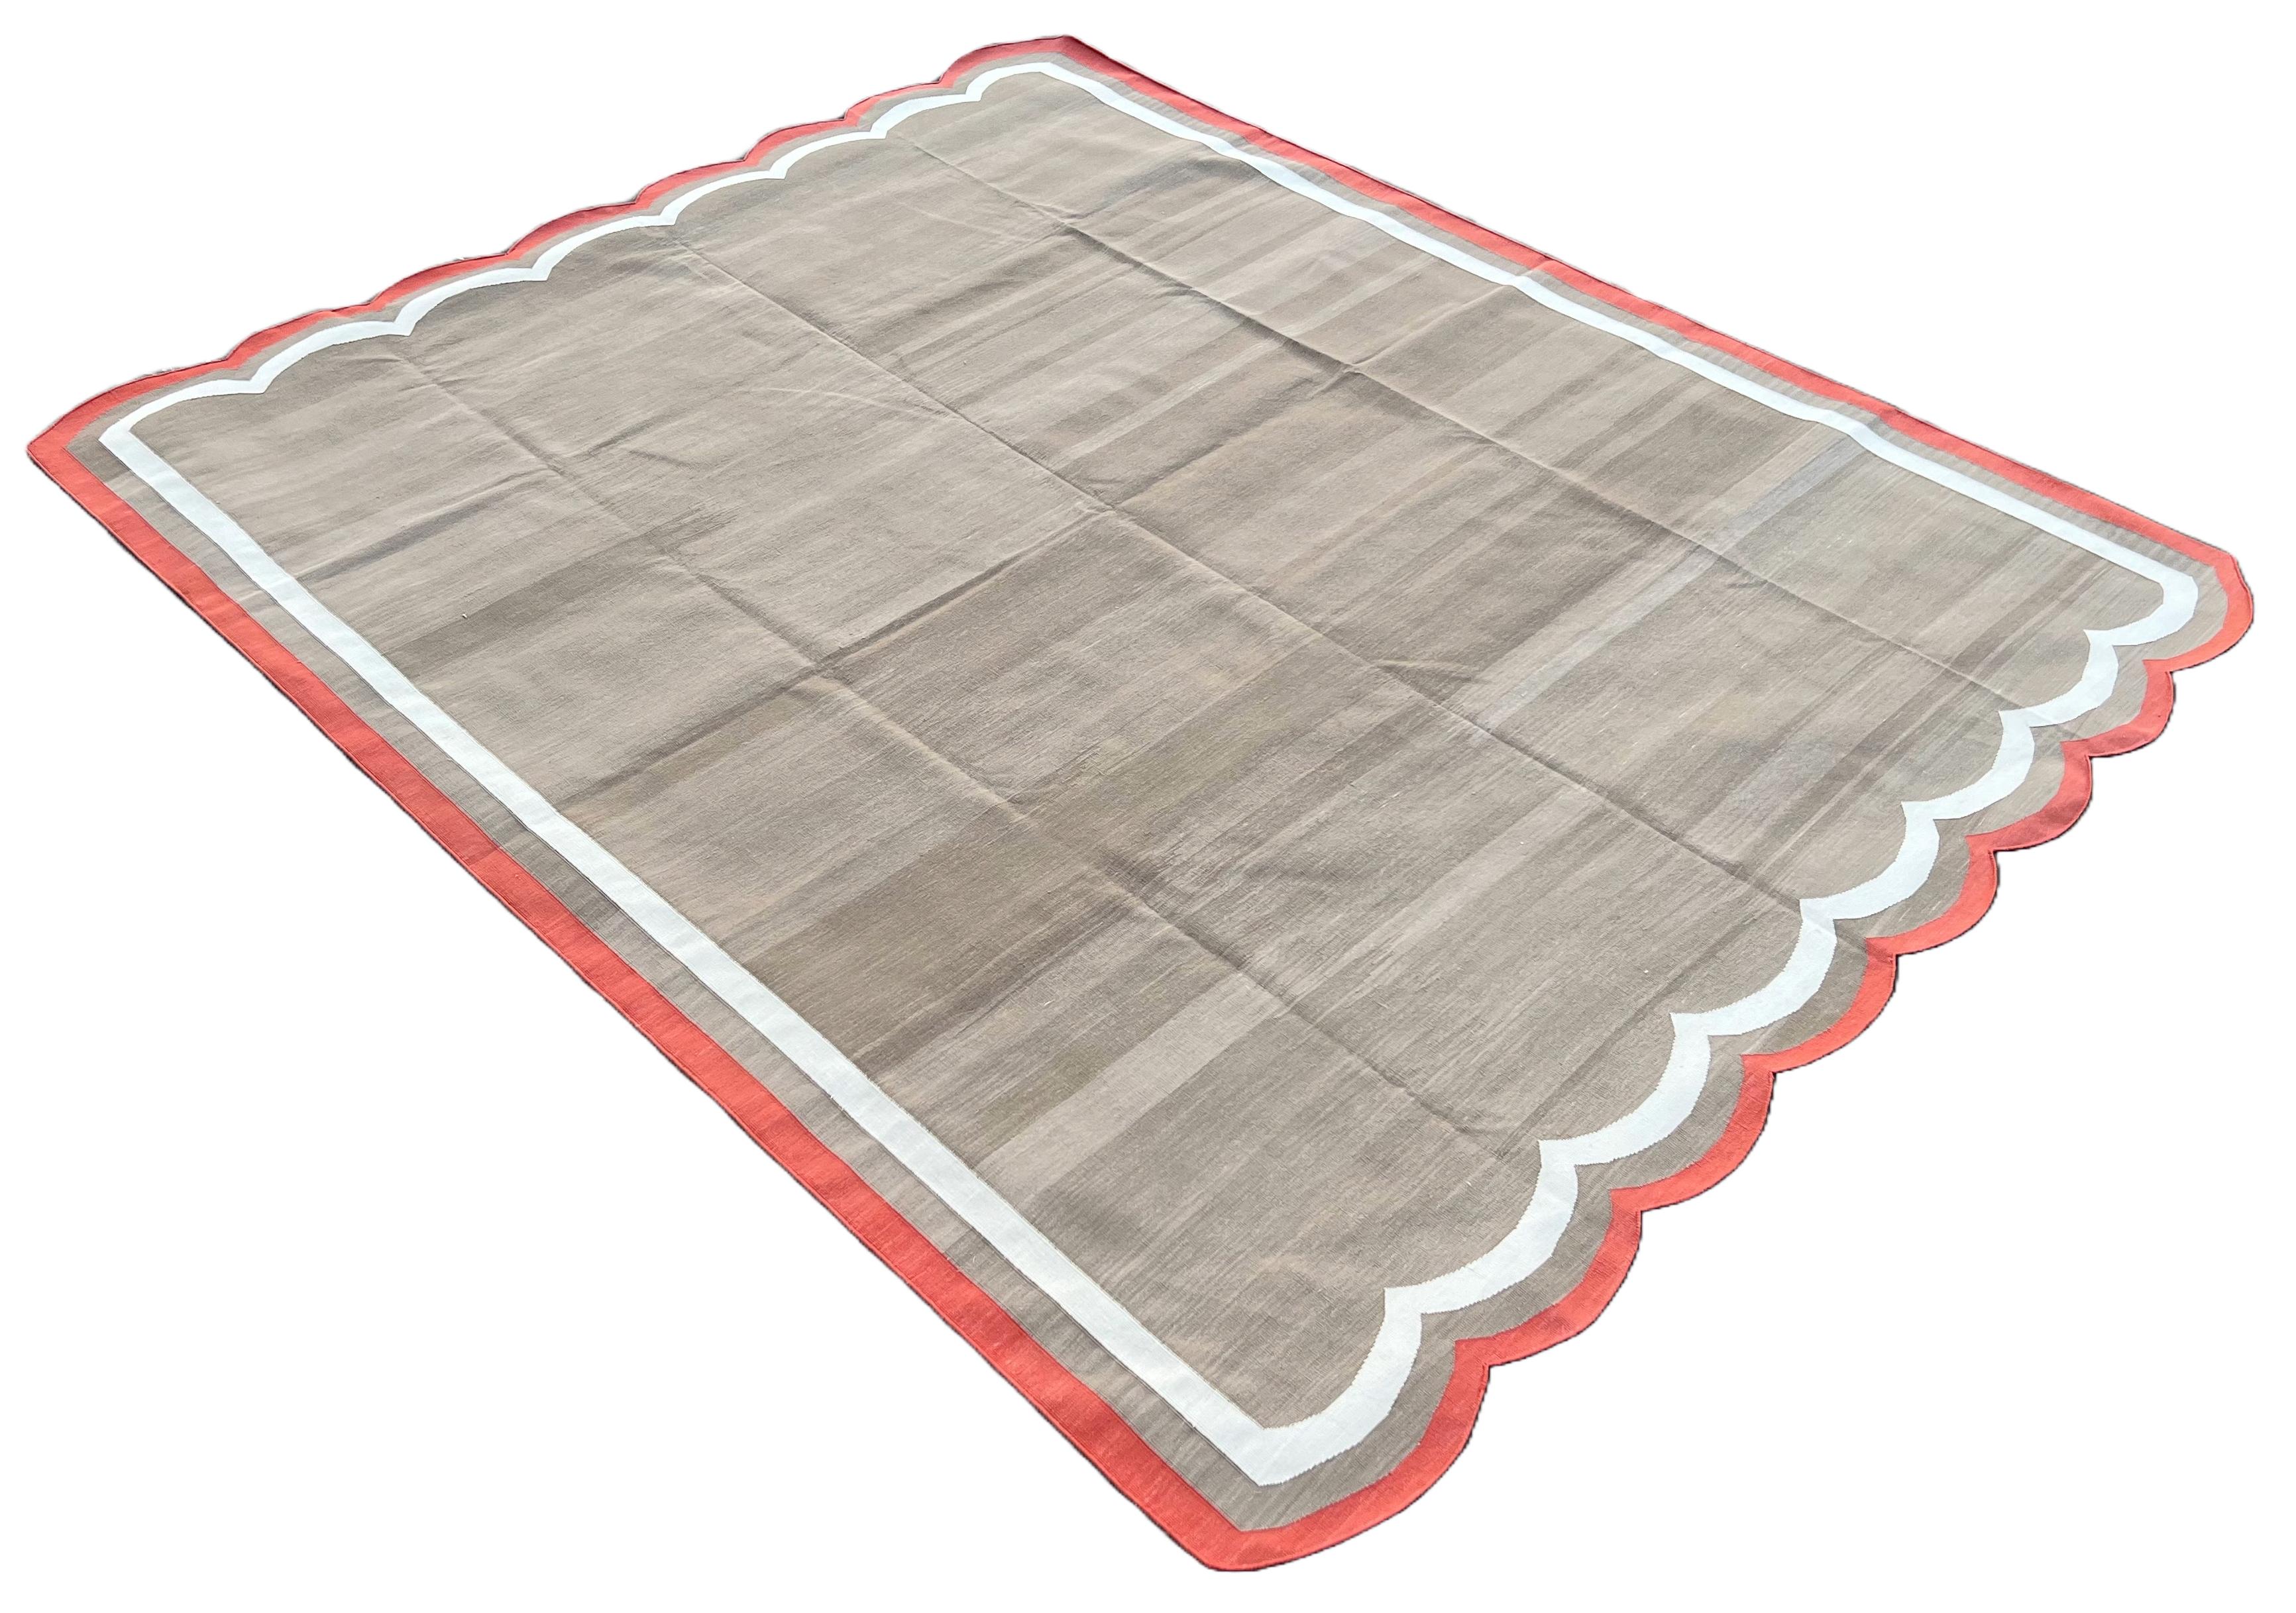 Cotton Vegetable Dyed Beige, Cream And Coral Two Sided Scalloped Rug-8'x10' 
(Scallops runs on all 8 Feet Sides)
These special flat-weave dhurries are hand-woven with 15 ply 100% cotton yarn. Due to the special manufacturing techniques used to